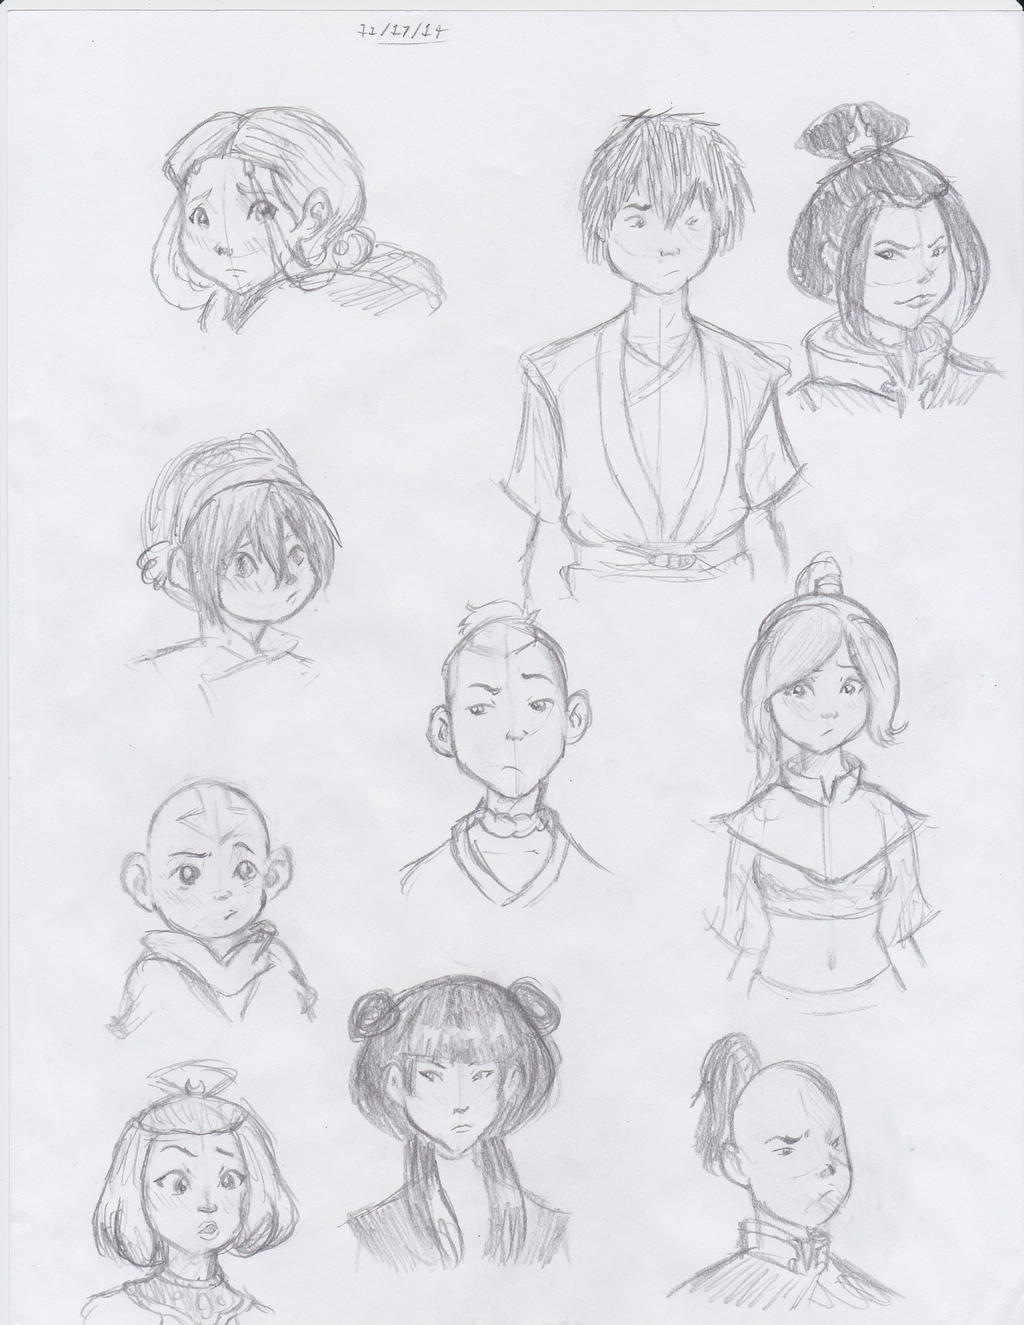 Avatar the Last Airbender Sketches by Lacedra on DeviantArt